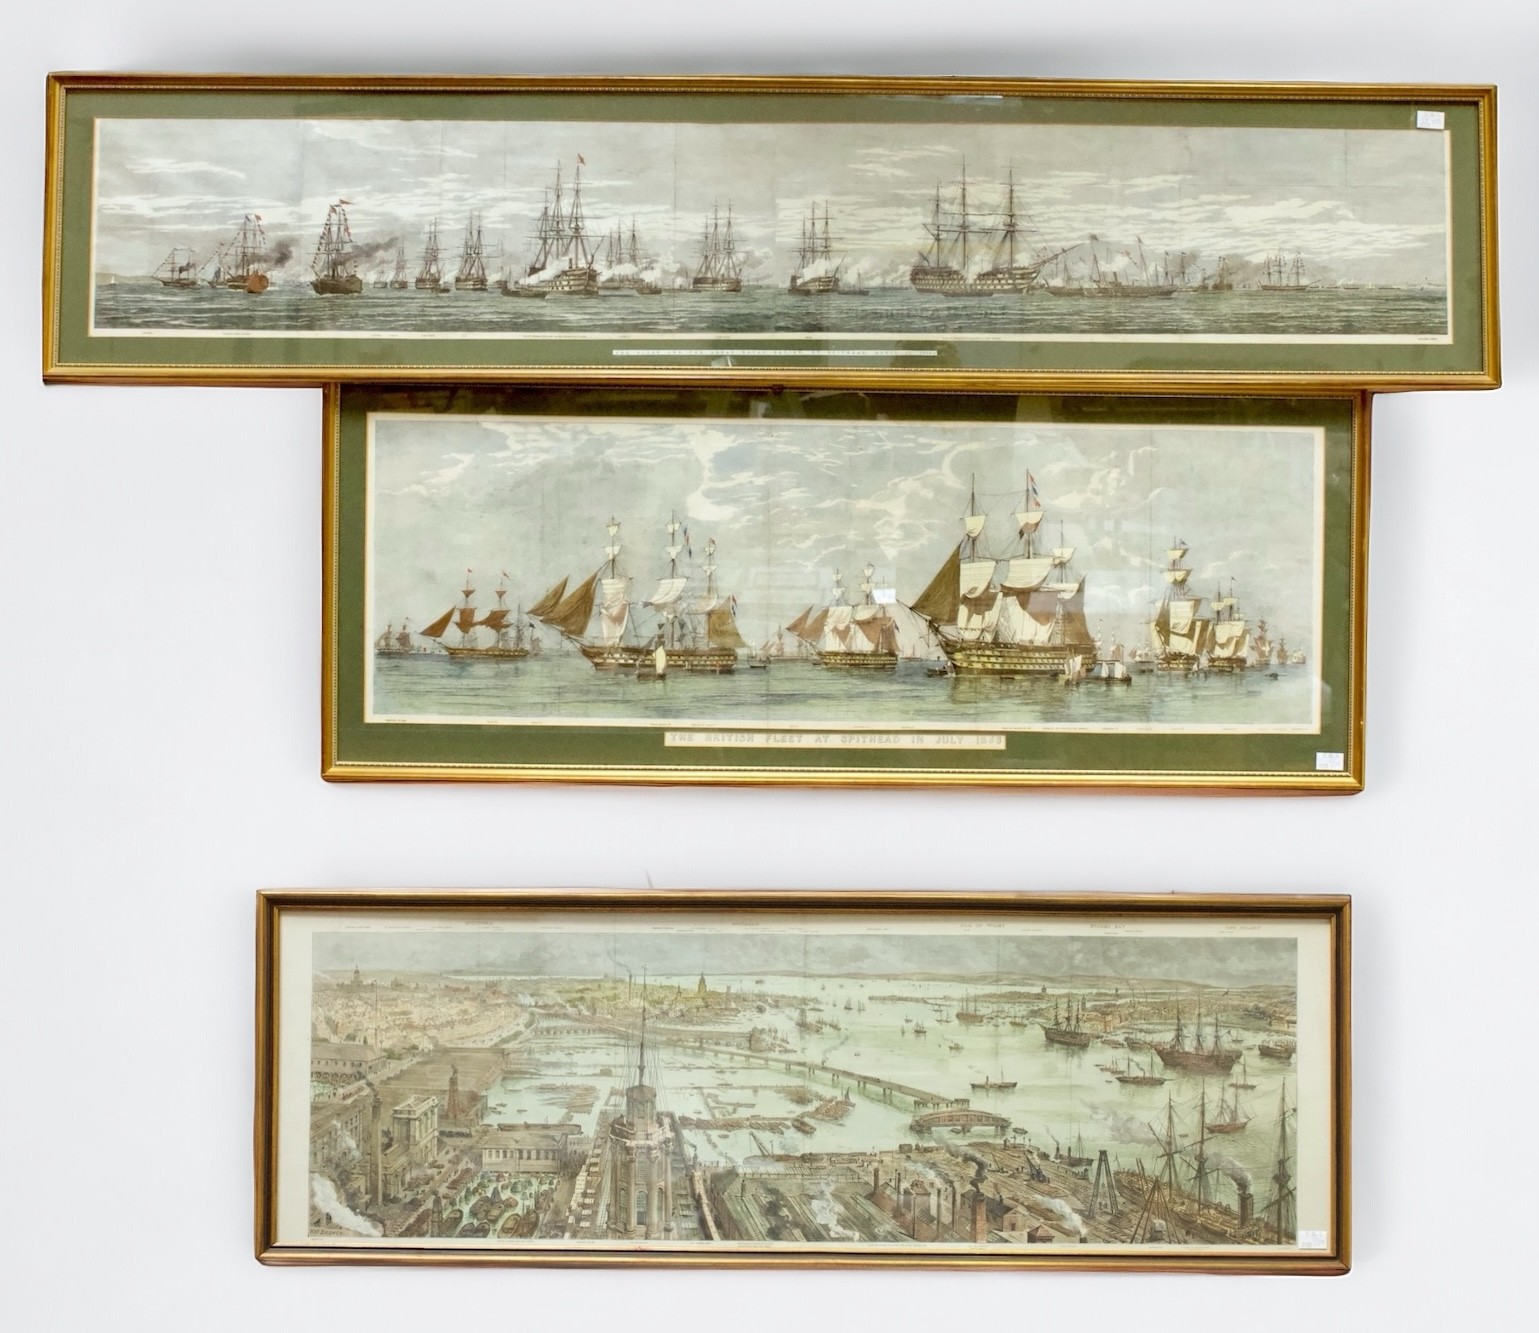 The British Fleet At Spithead In July 1853, after E. Duncan, 35x108cm, The Fleet And The Great Naval